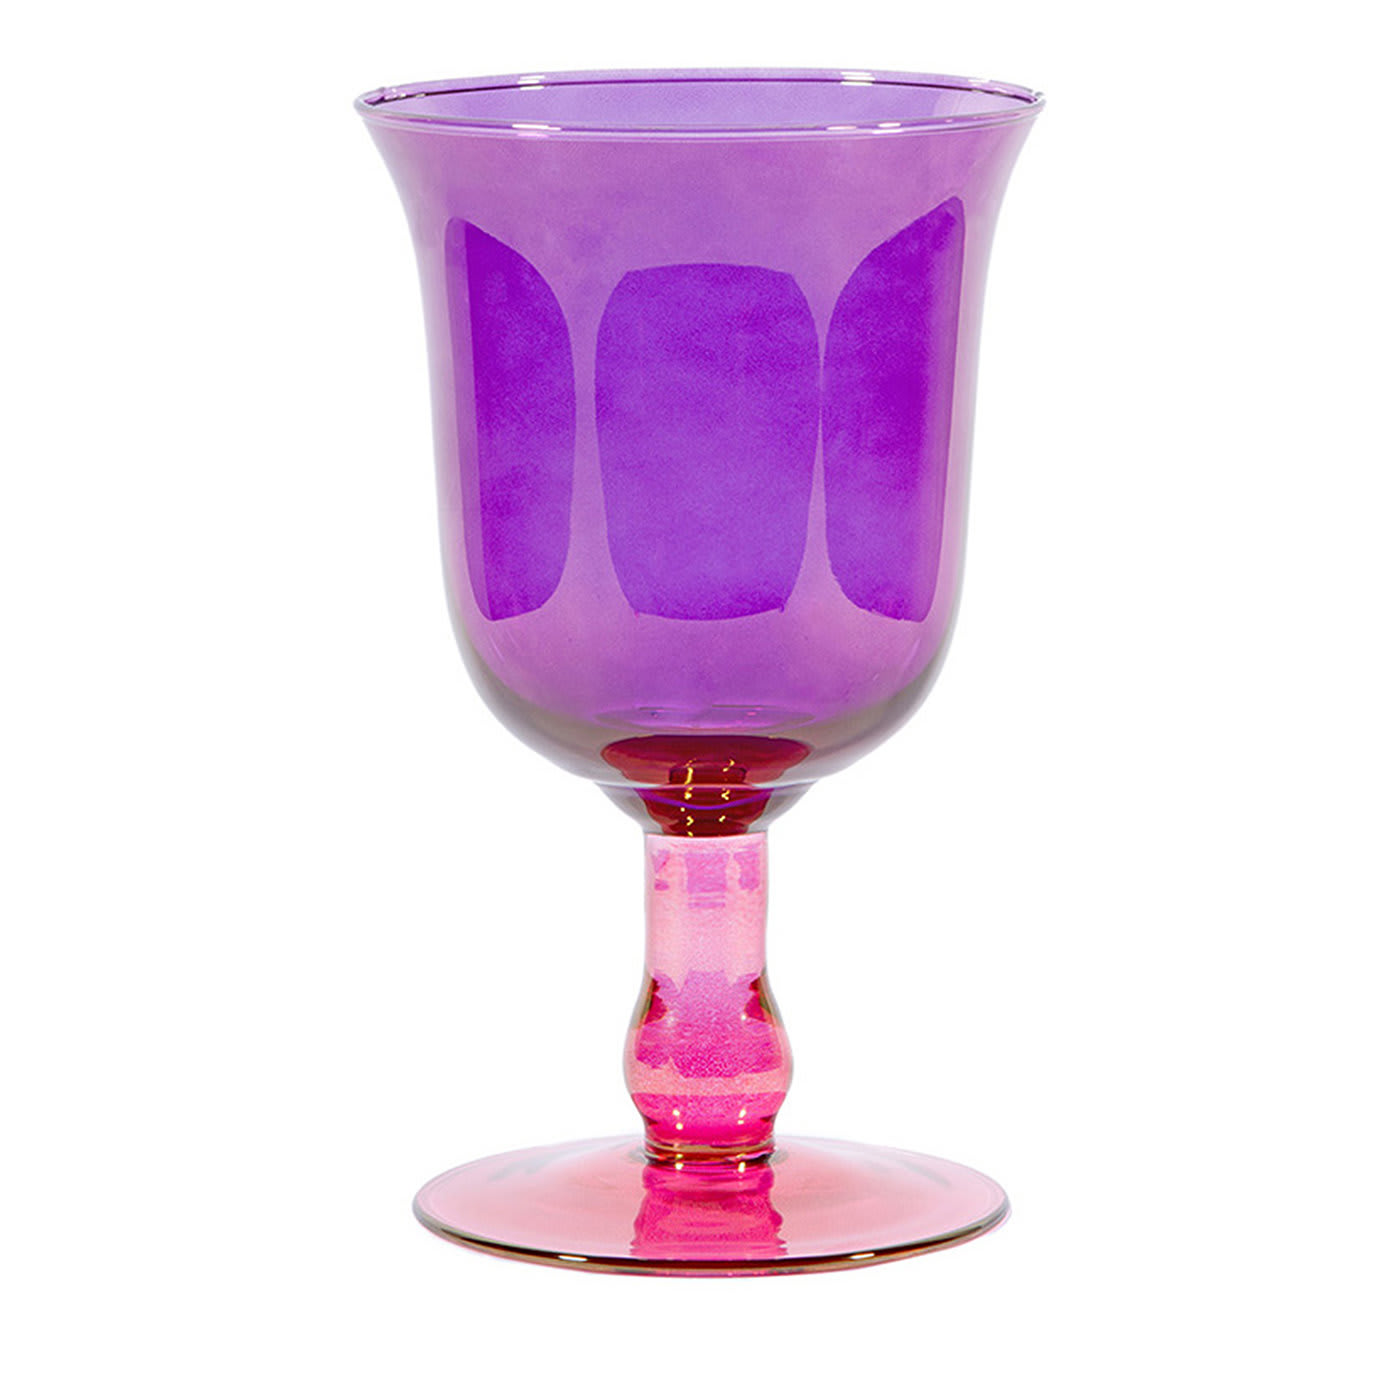 Small Pink-To-Violet Goblet Vase - Luisa Beccaria